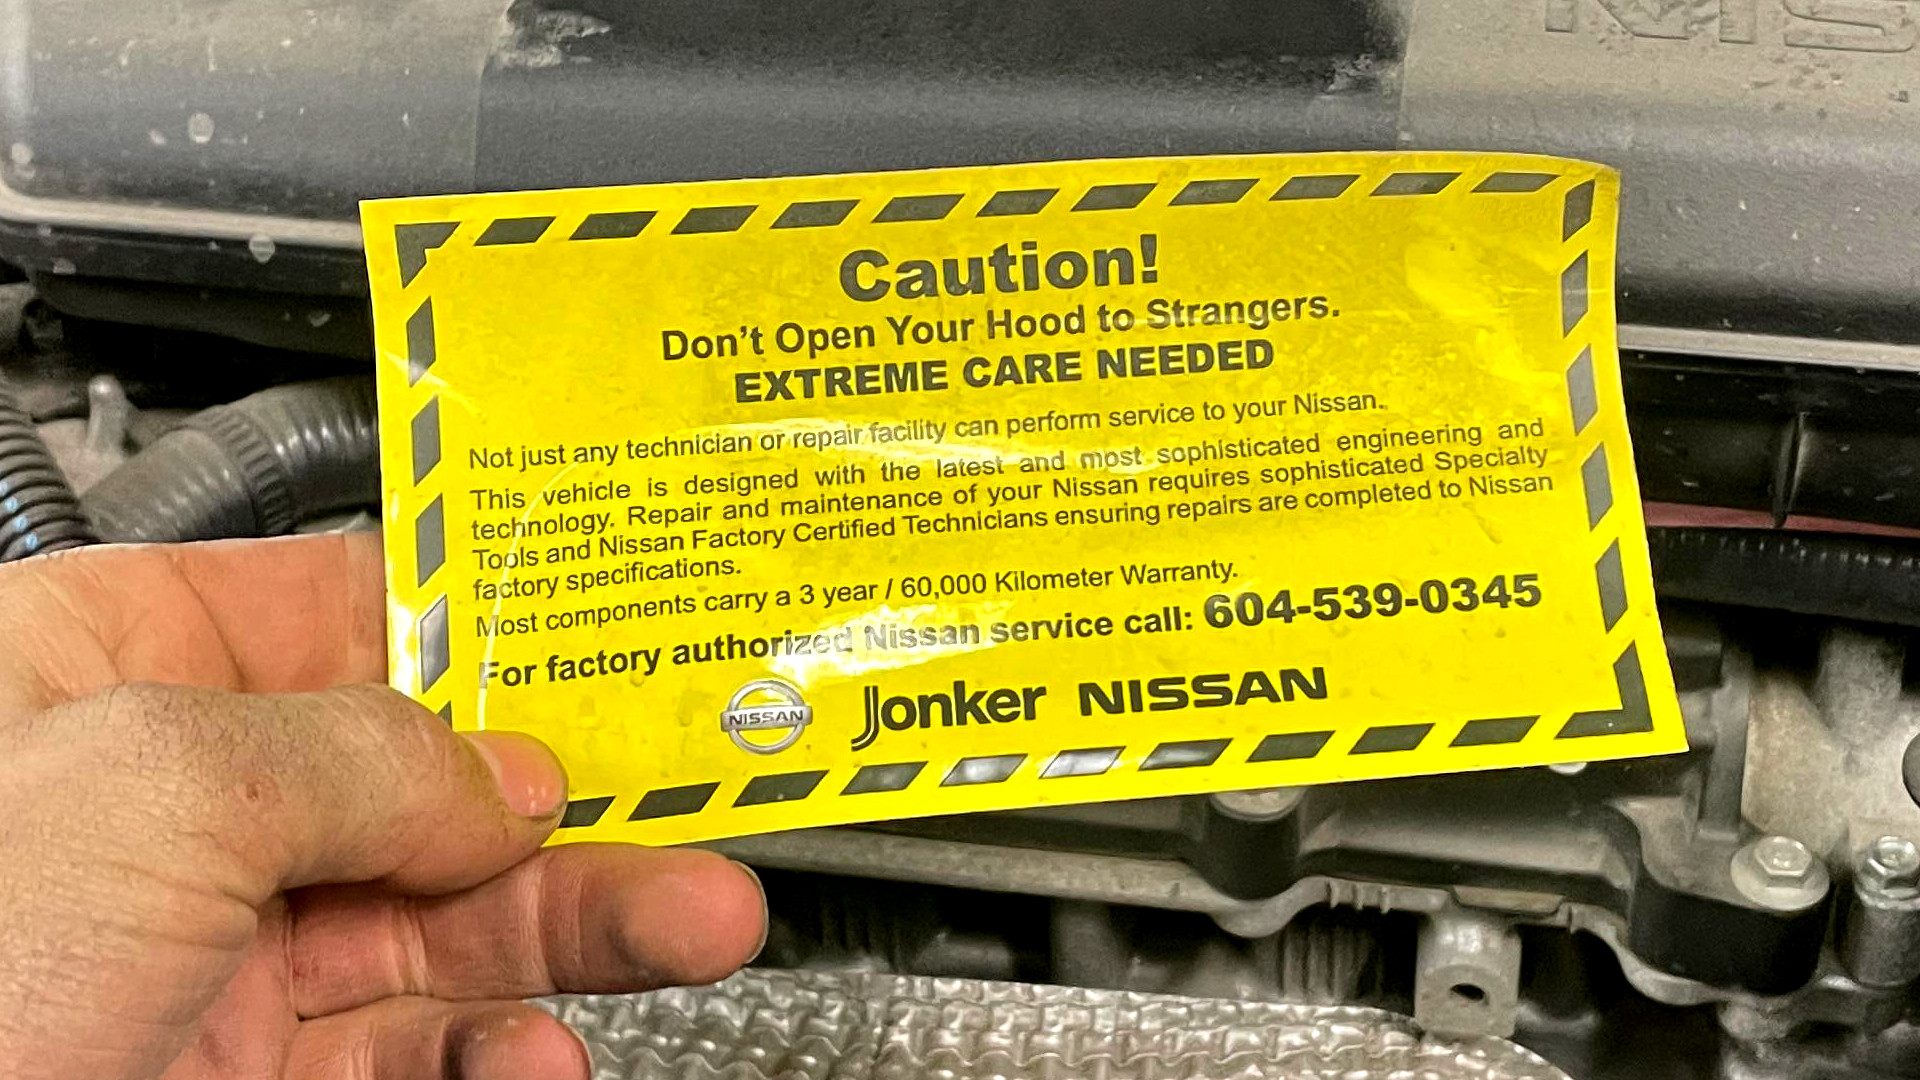 ‘Don’t Open Your Hood To Strangers’: Nissan Dealer Tries to Scare Owners